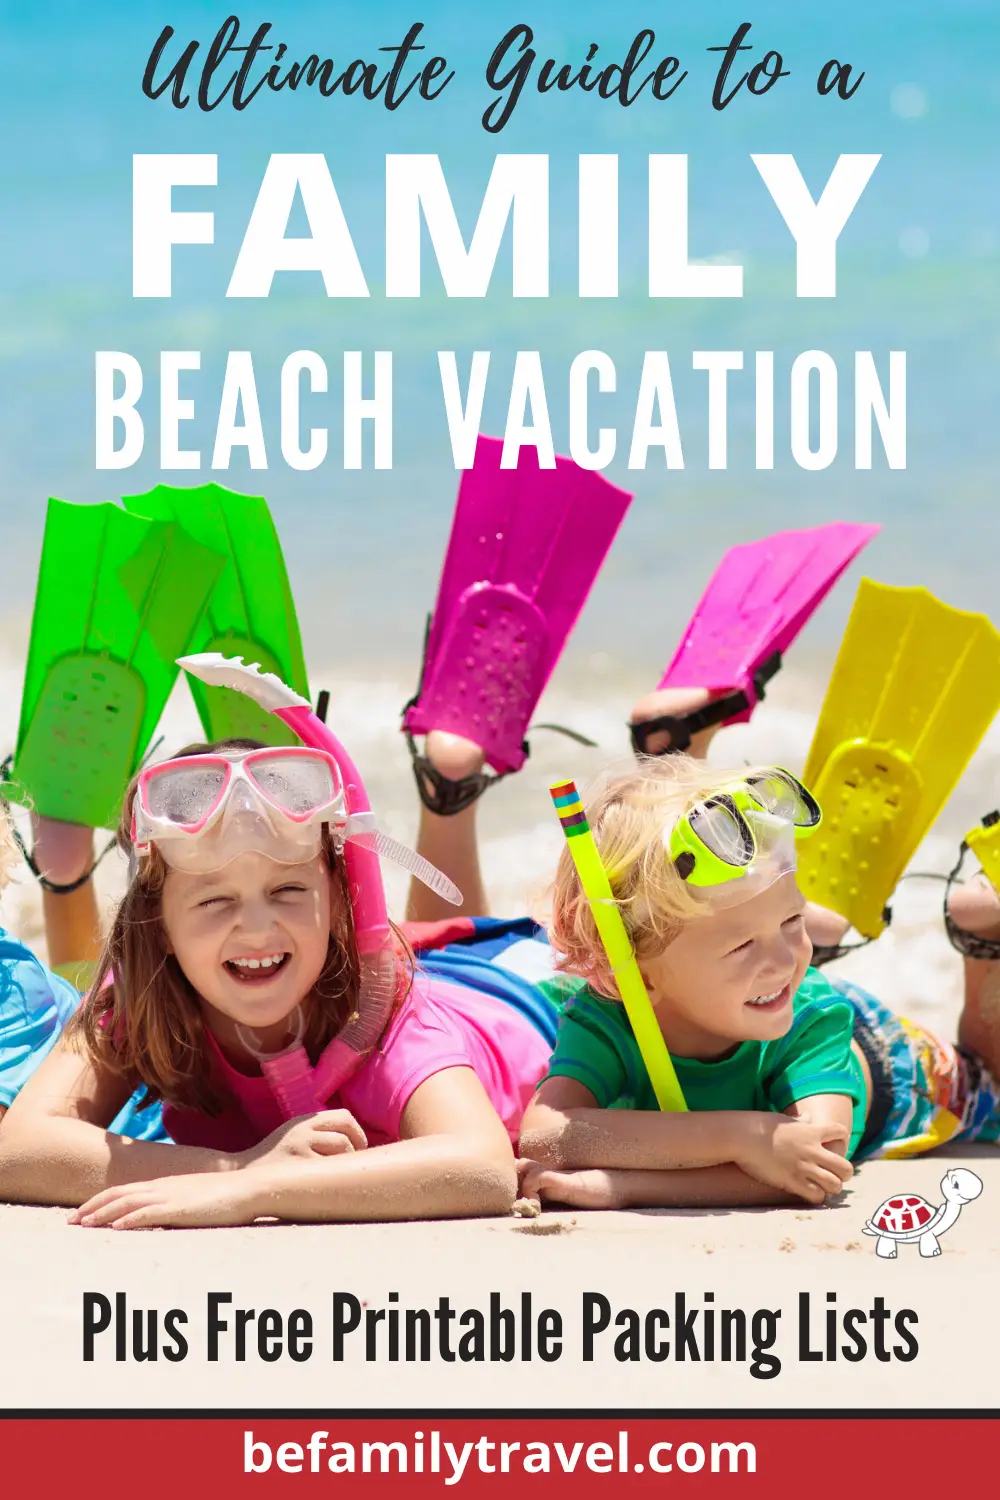 Family Beach Vacation - Ultimate Guide & Packing Lists - BeFamilyTravel